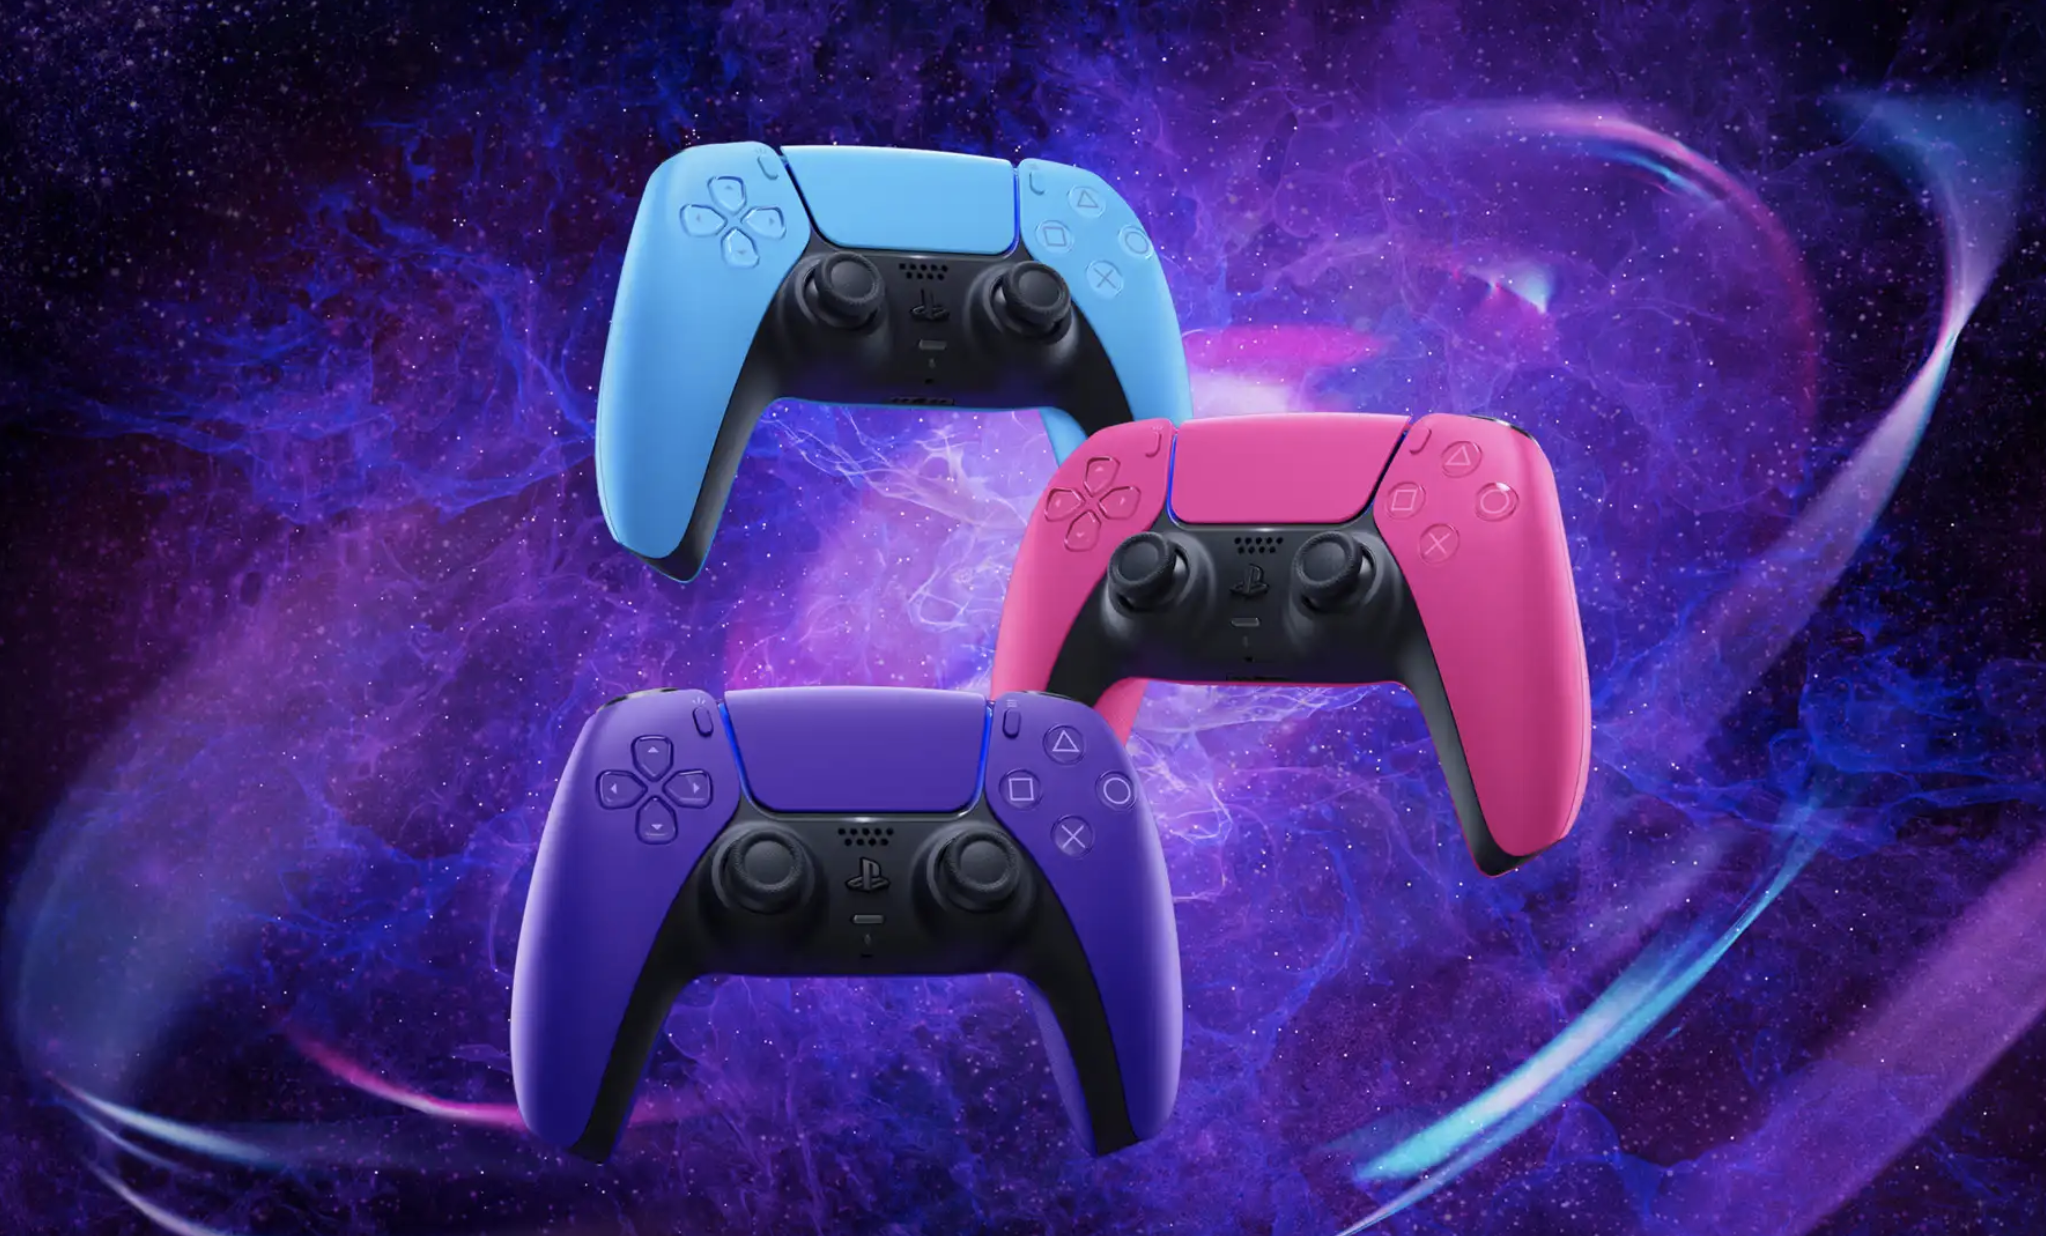 PS5 DualSense controllers in blue, pink and purple.